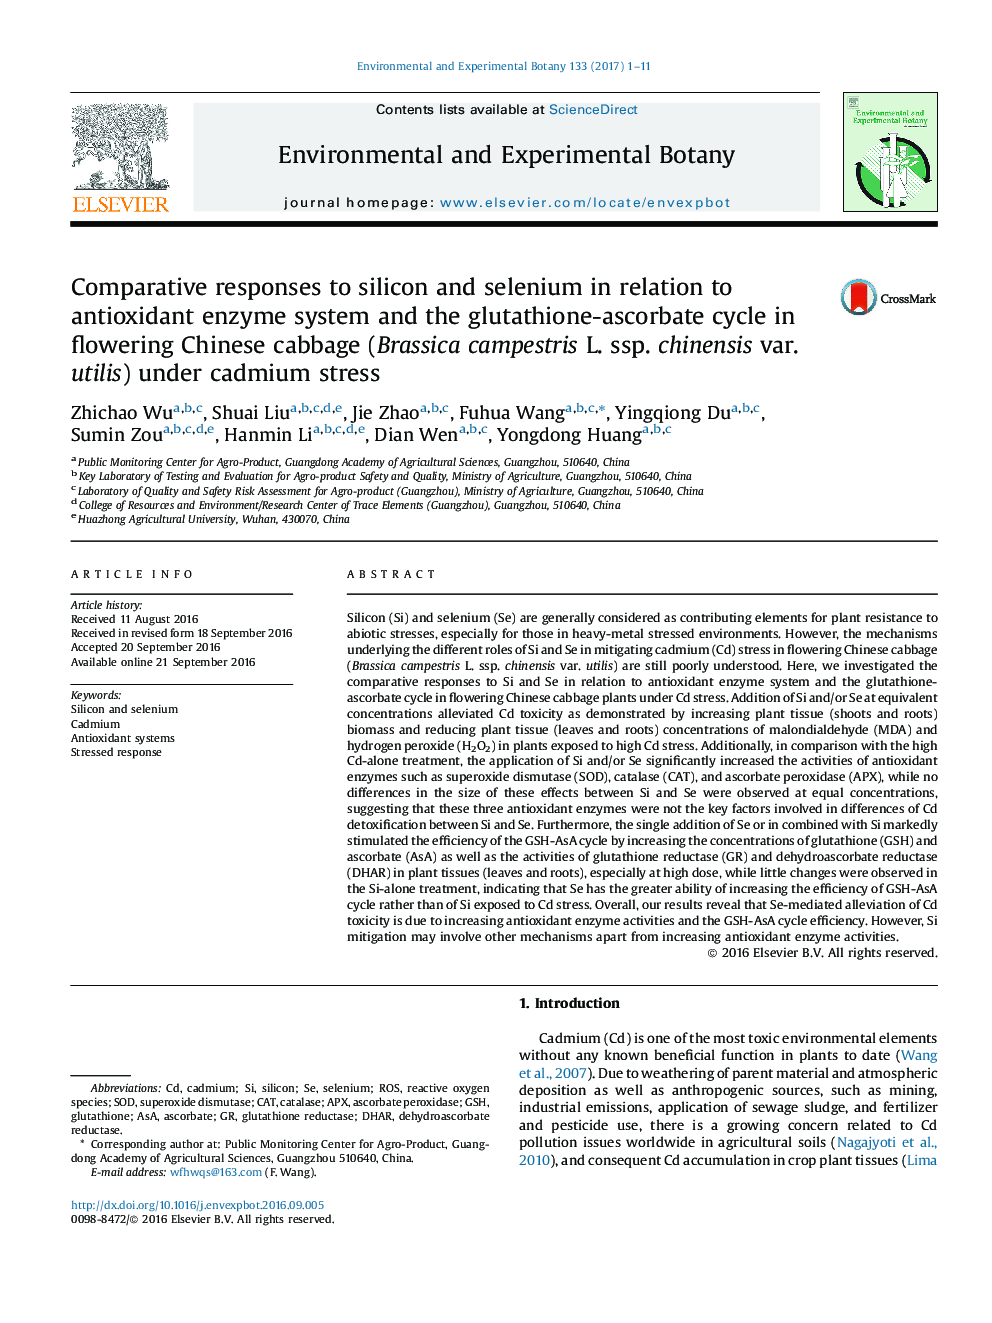 Comparative responses to silicon and selenium in relation to antioxidant enzyme system and the glutathione-ascorbate cycle in flowering Chinese cabbage (Brassica campestris L. ssp. chinensis var. utilis) under cadmium stress